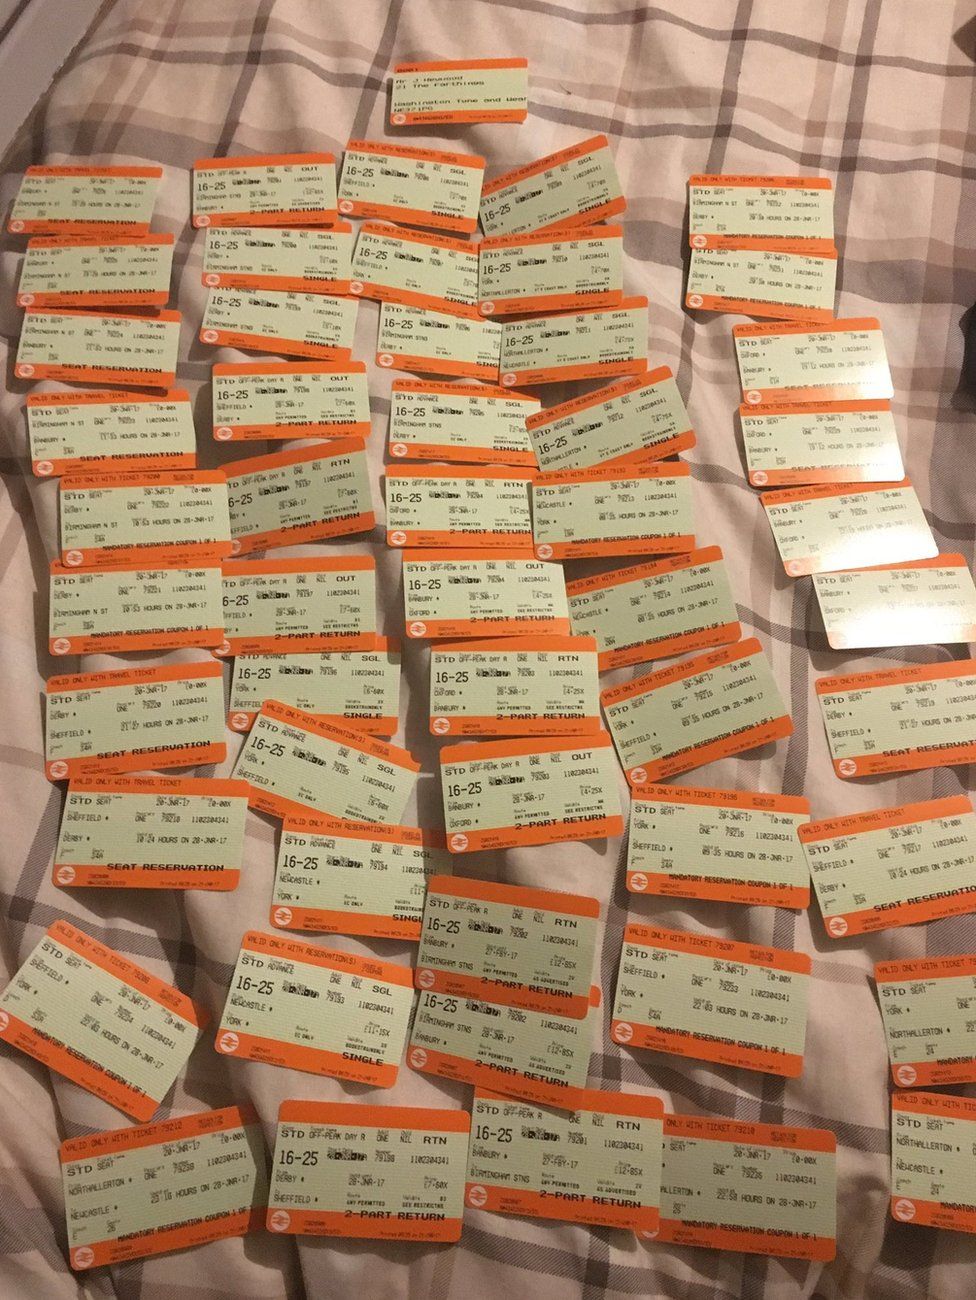 More than 50 tickets for Mr Heywood's rail journey